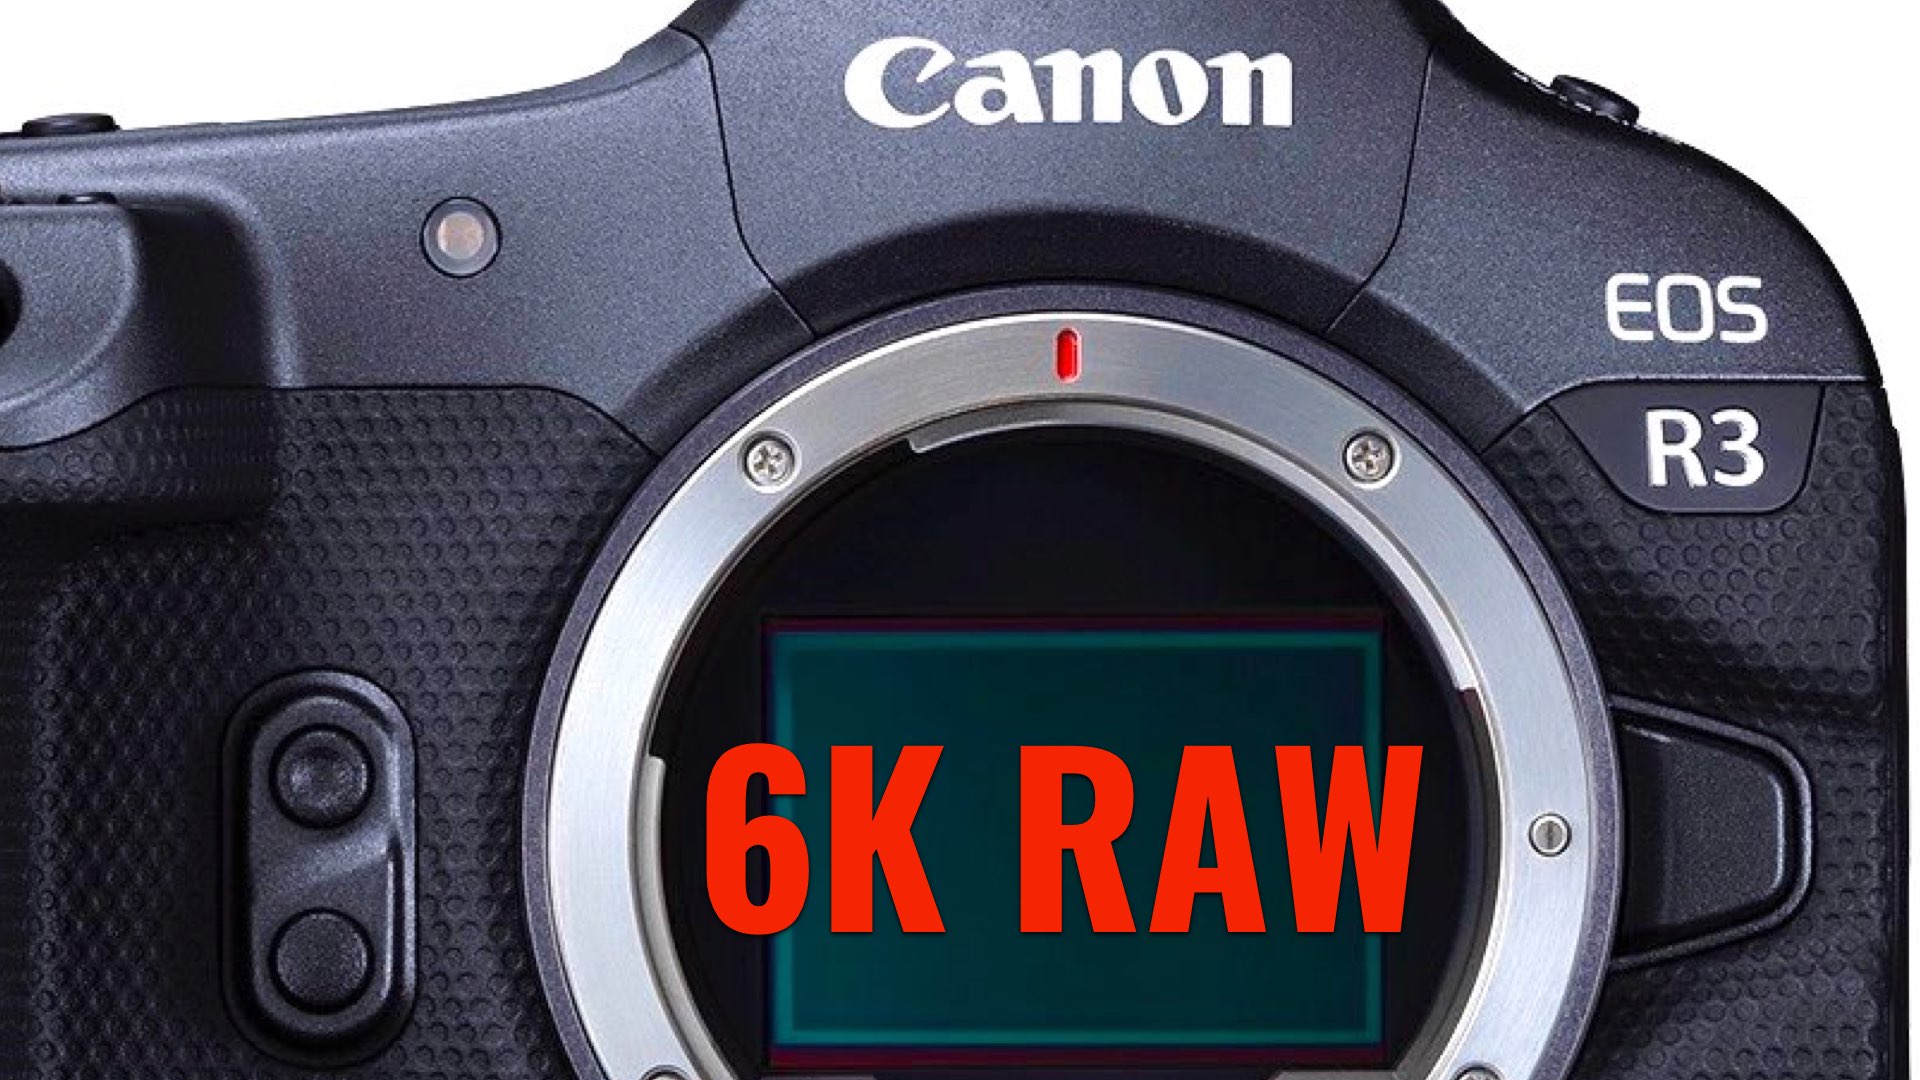 Canon Officially Announced the Impressive EOS R3: Full-Frame 6K RAW at 60FPS, But Not a Flagship